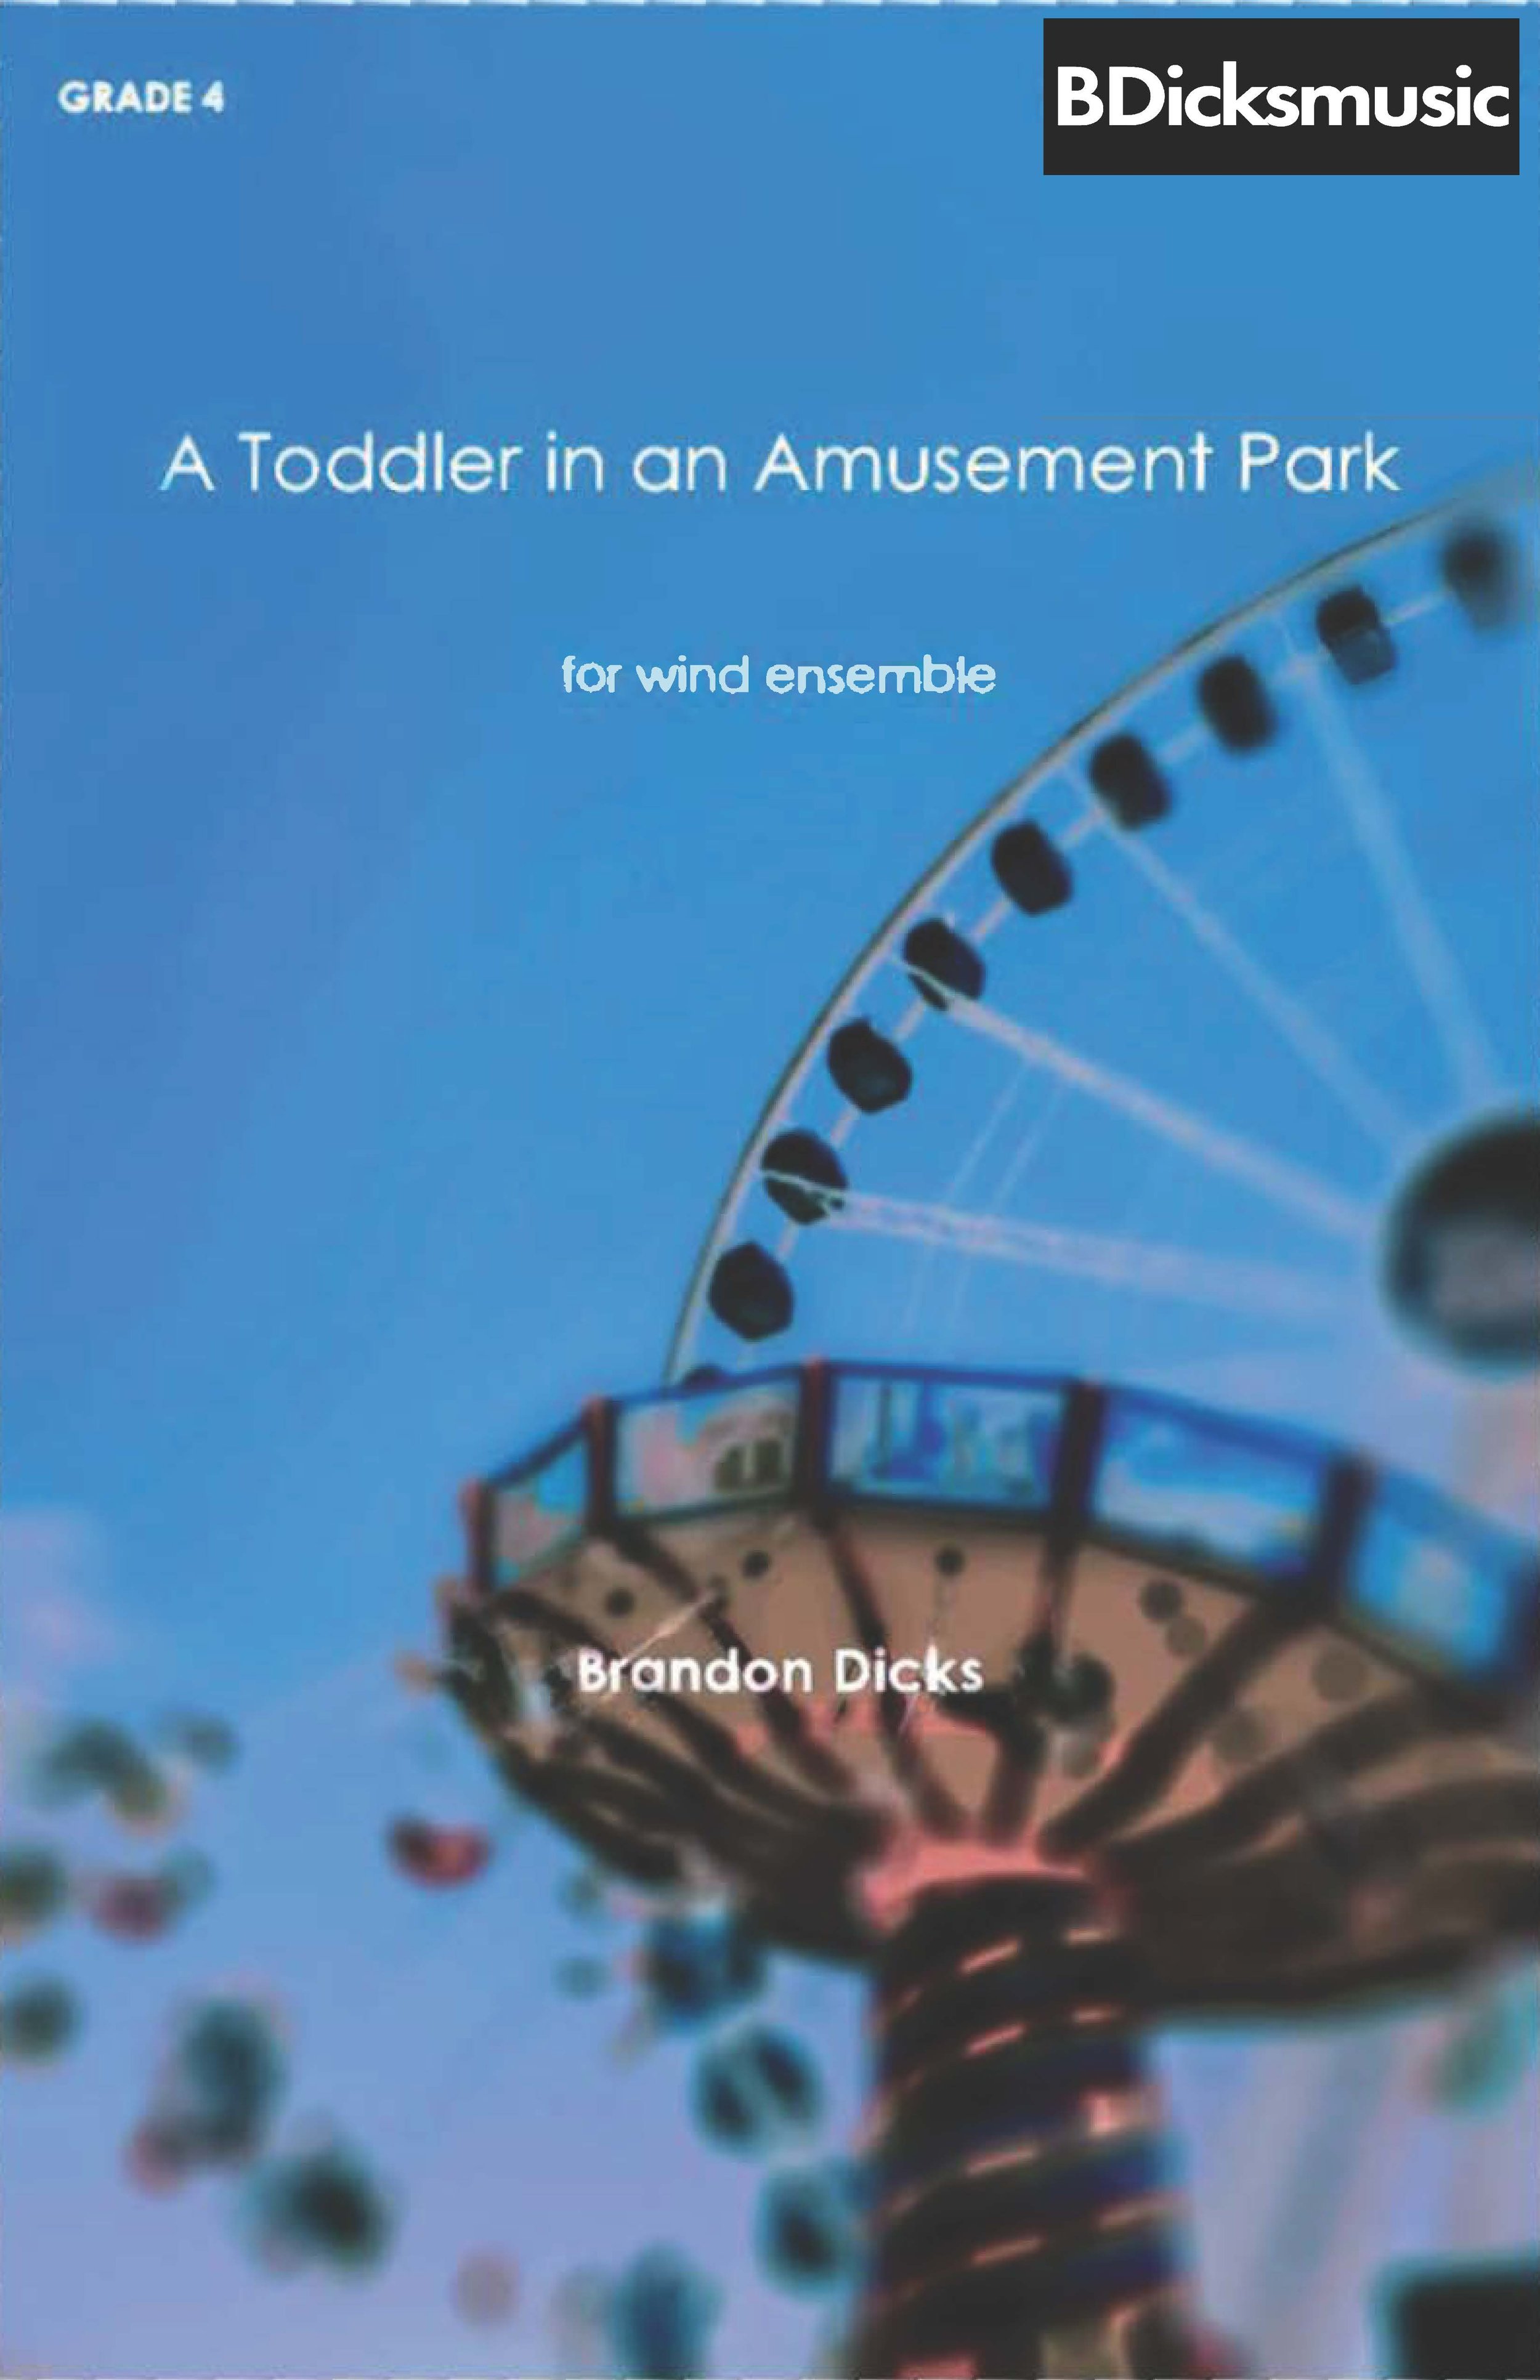 Dicks - A Toddler in an Amusement Park - Full score_Page_01.jpg